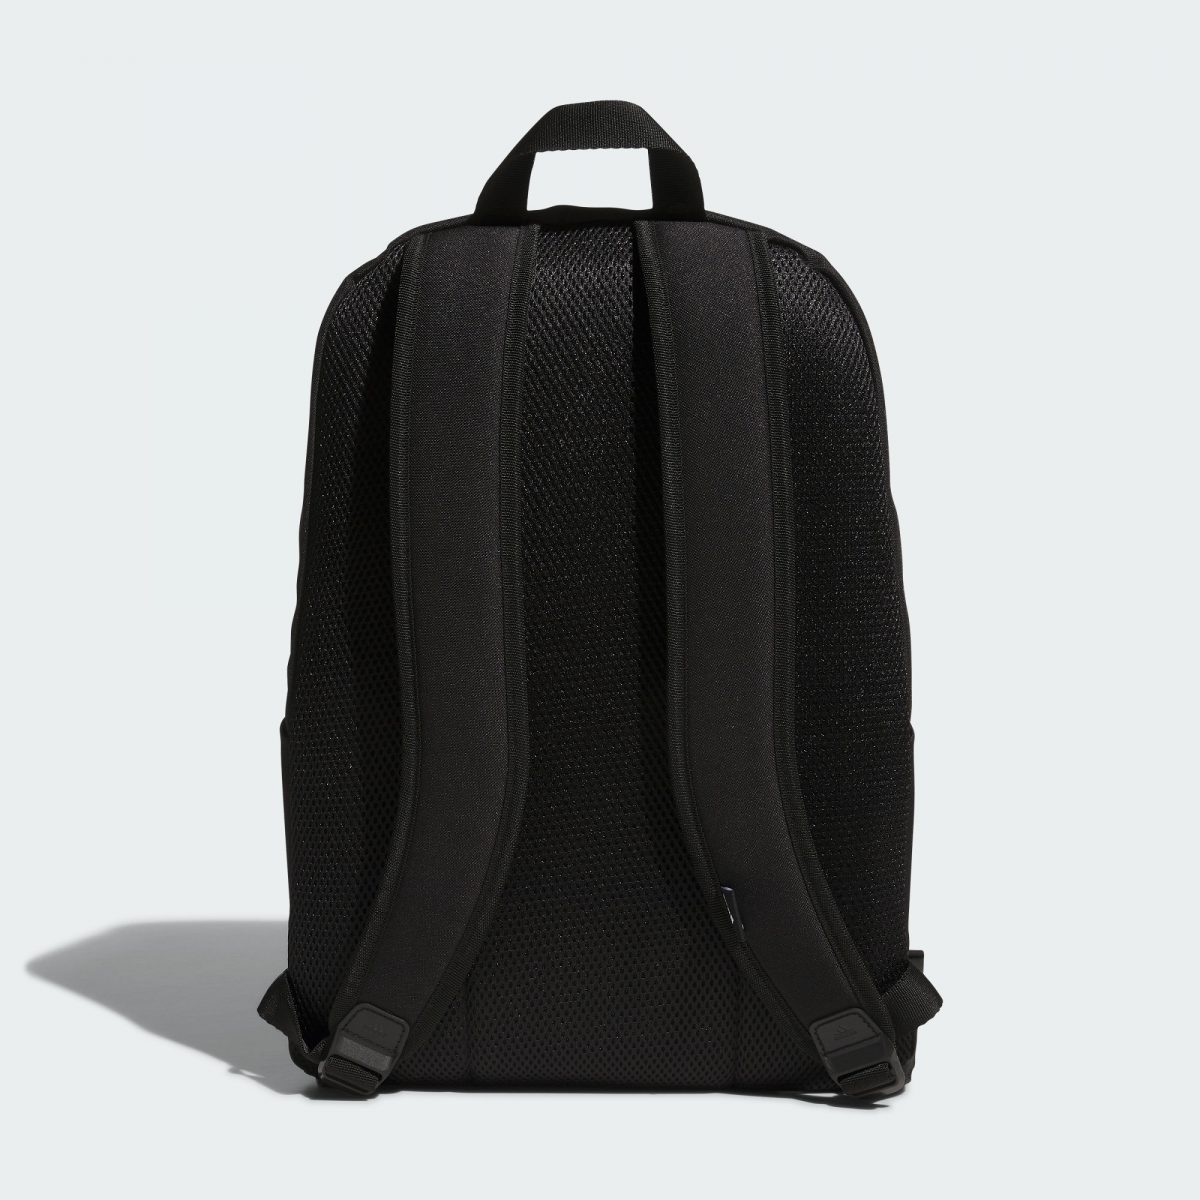 Рюкзак adidas MUST HAVES 2-IN-1 BACKPACK фотография